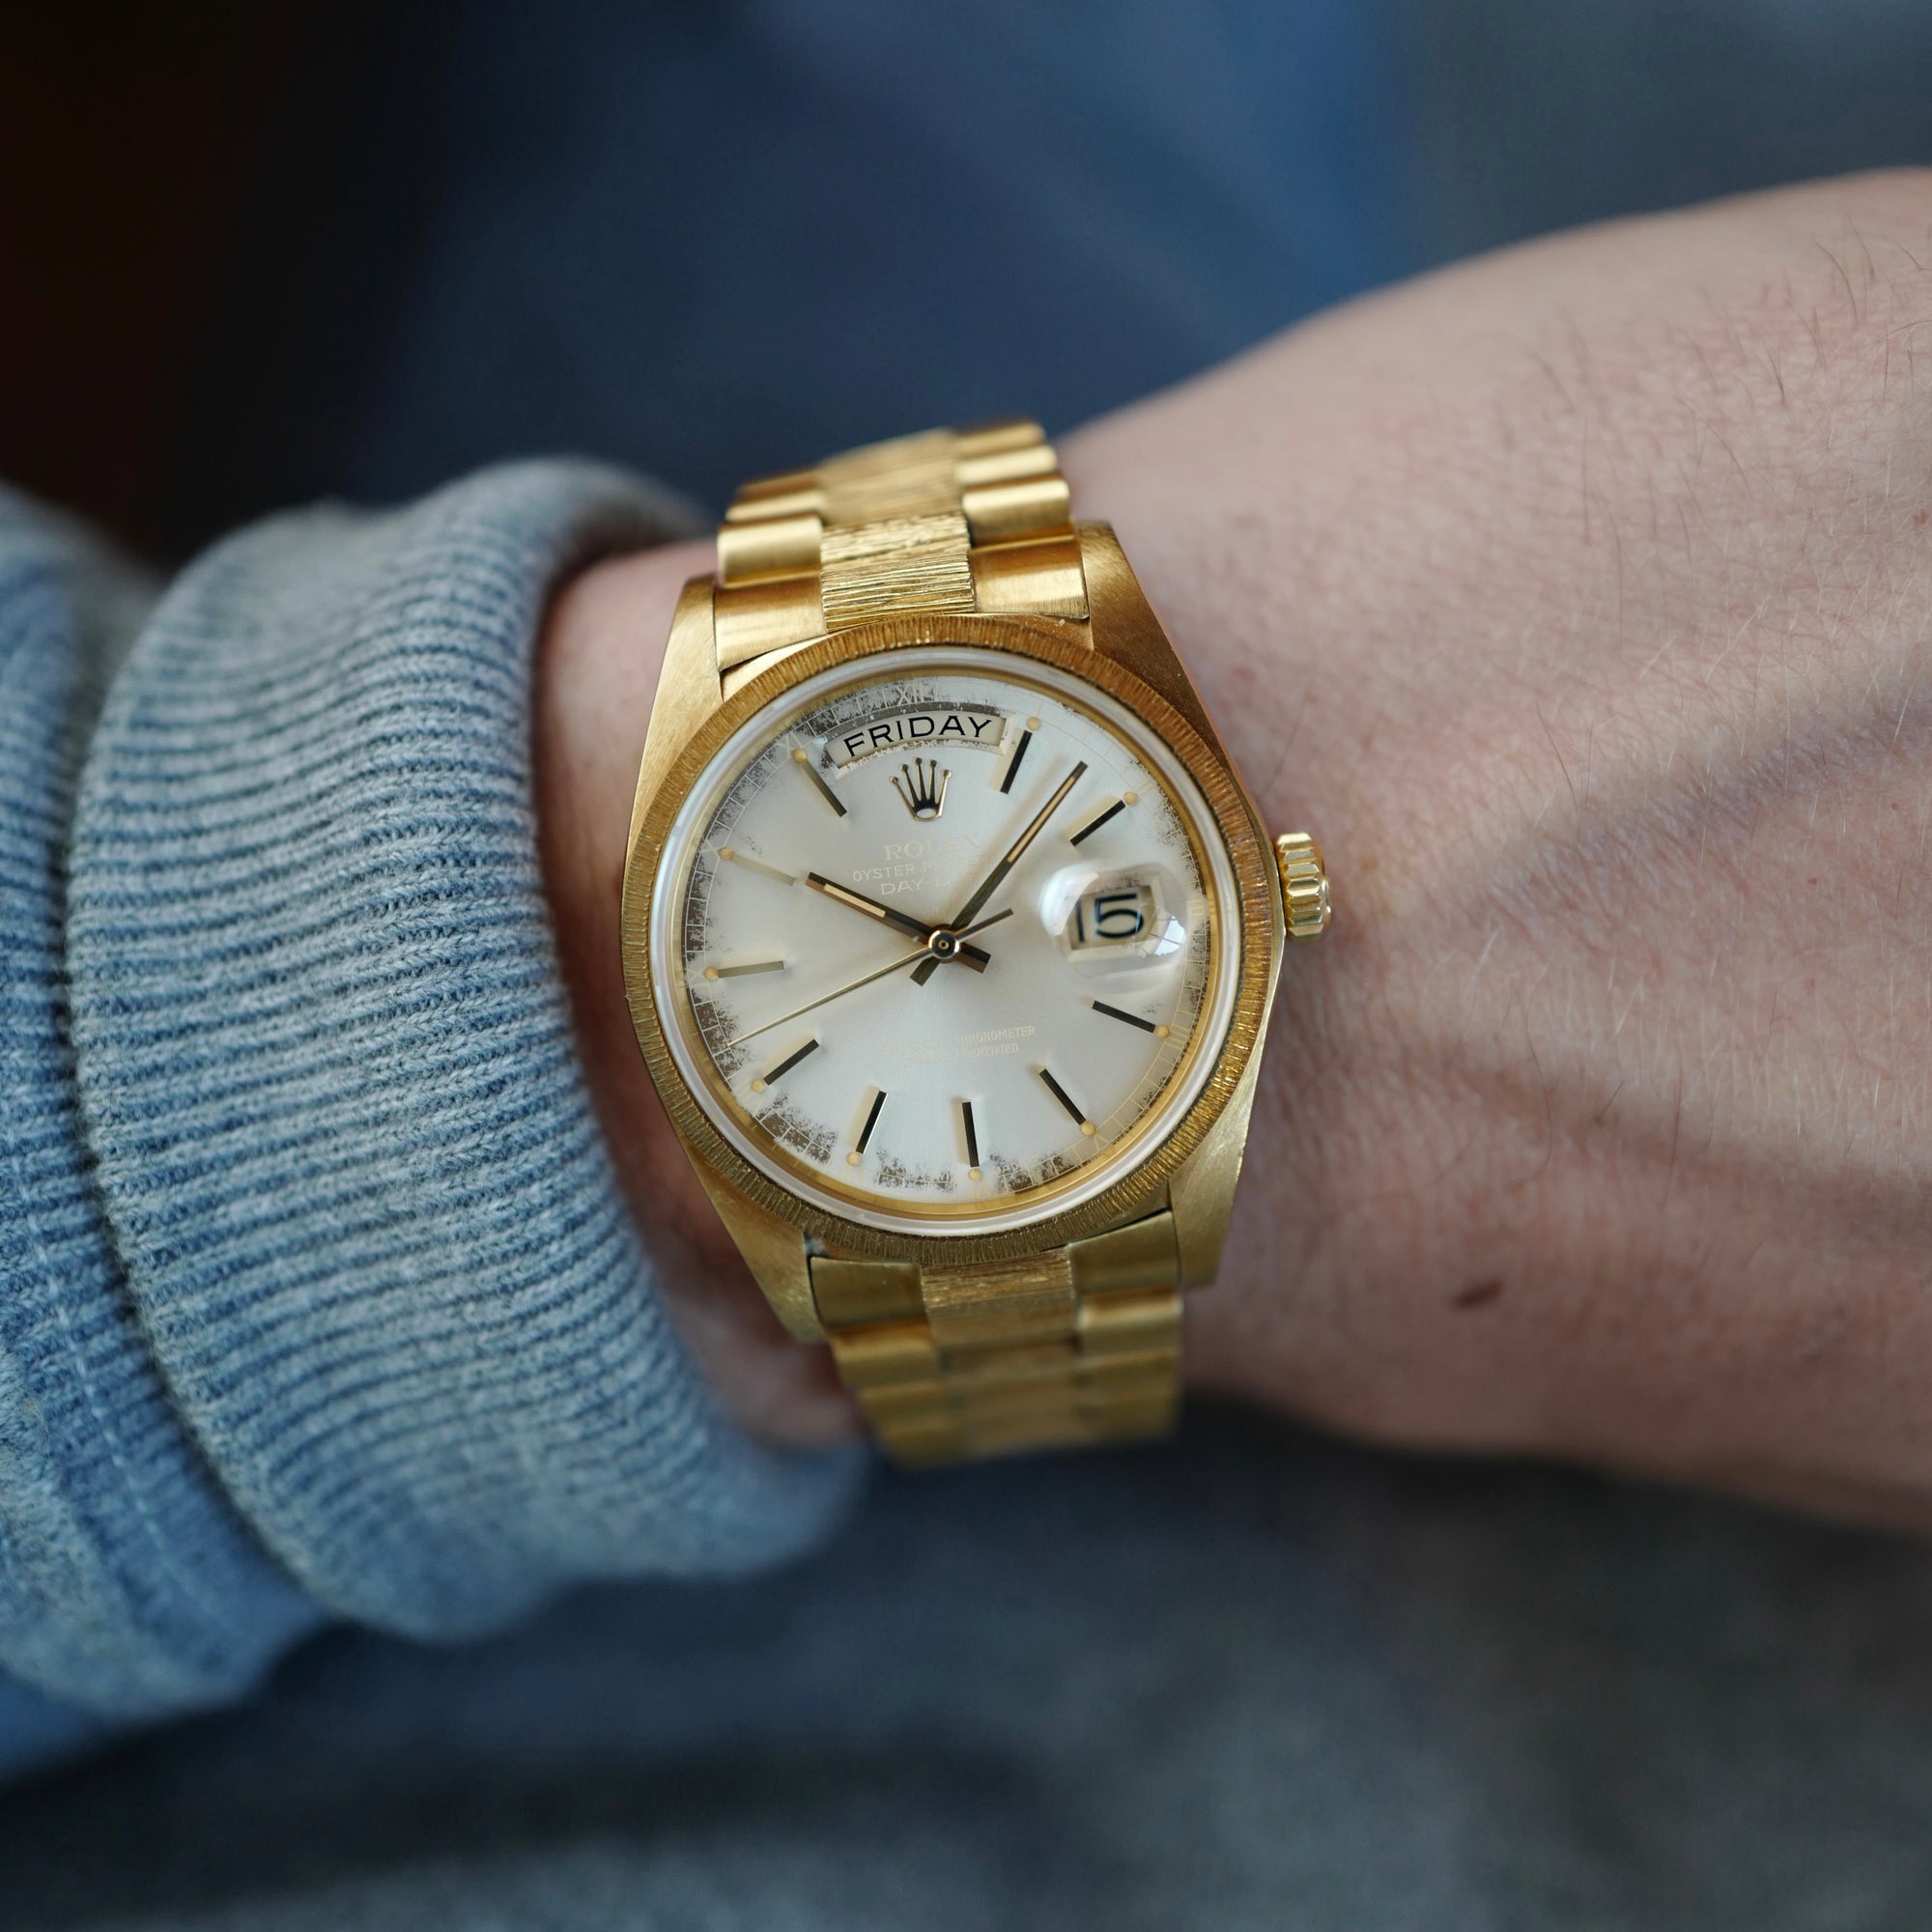 Rolex - Rolex Yellow Gold Bark Finish Day-Date Ref. 18078 with Ghost Dial (NEW ARRIVAL) - The Keystone Watches